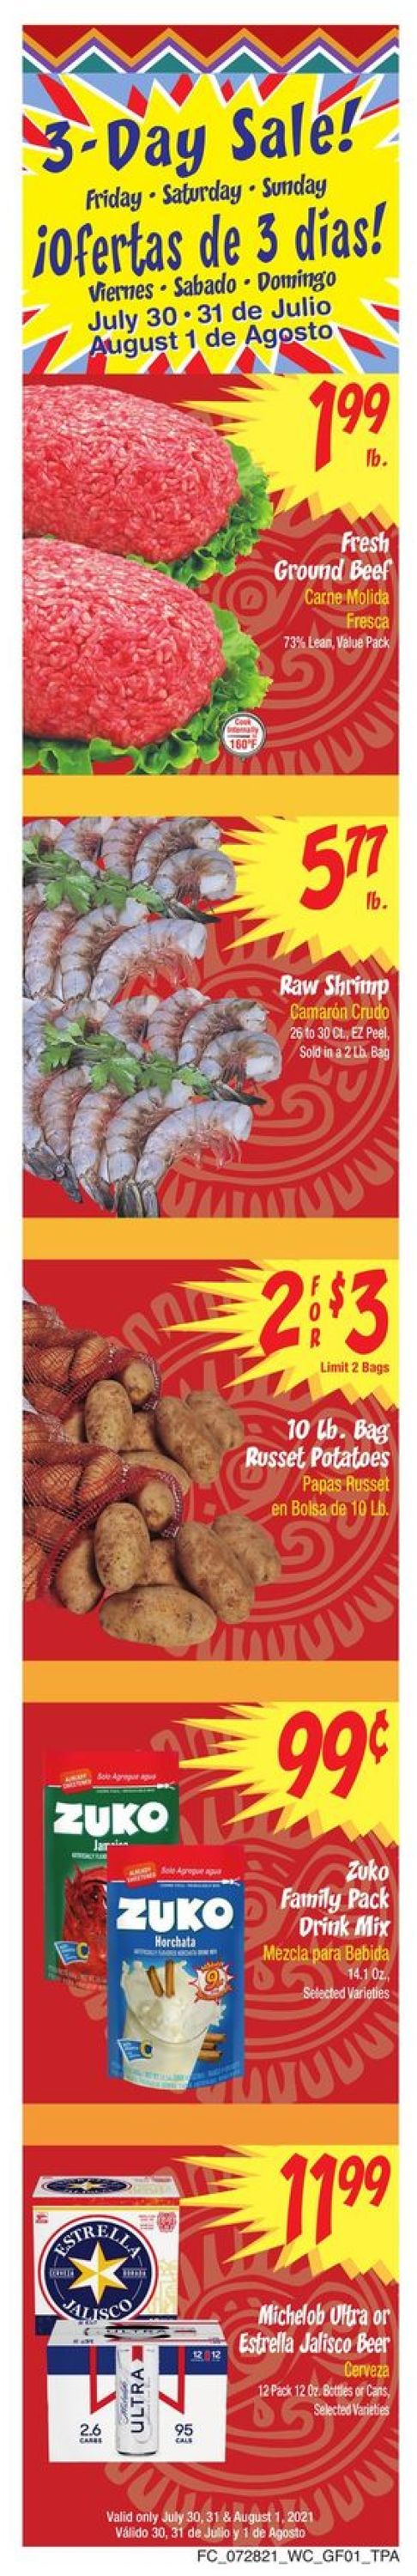 Food City Ad from 07/28/2021